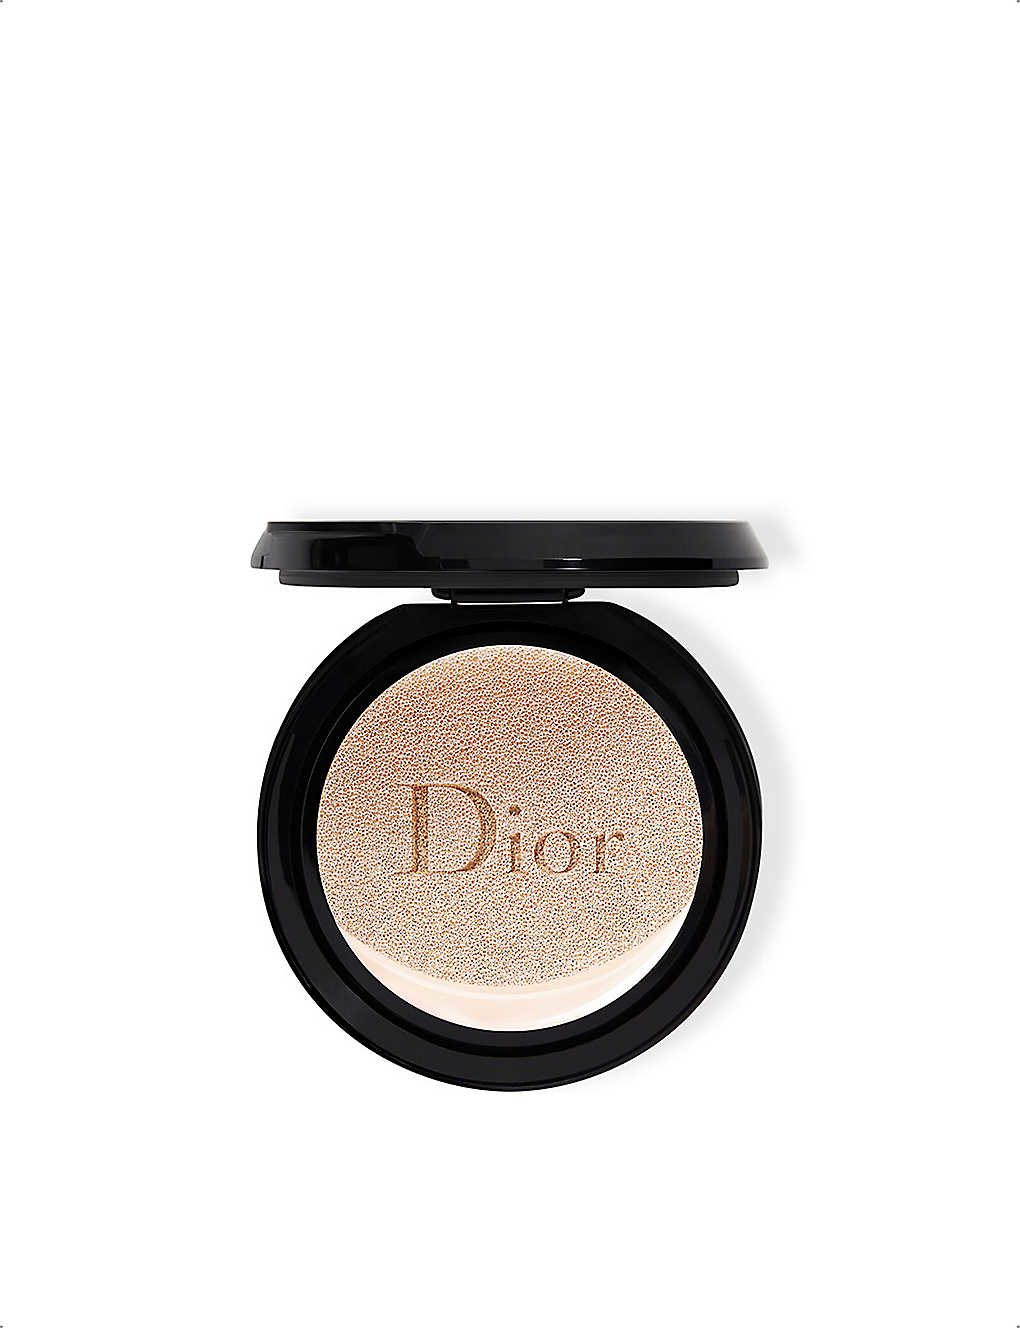 Dior Forever Couture Skin Glow Cushion Foundation Refill 14g